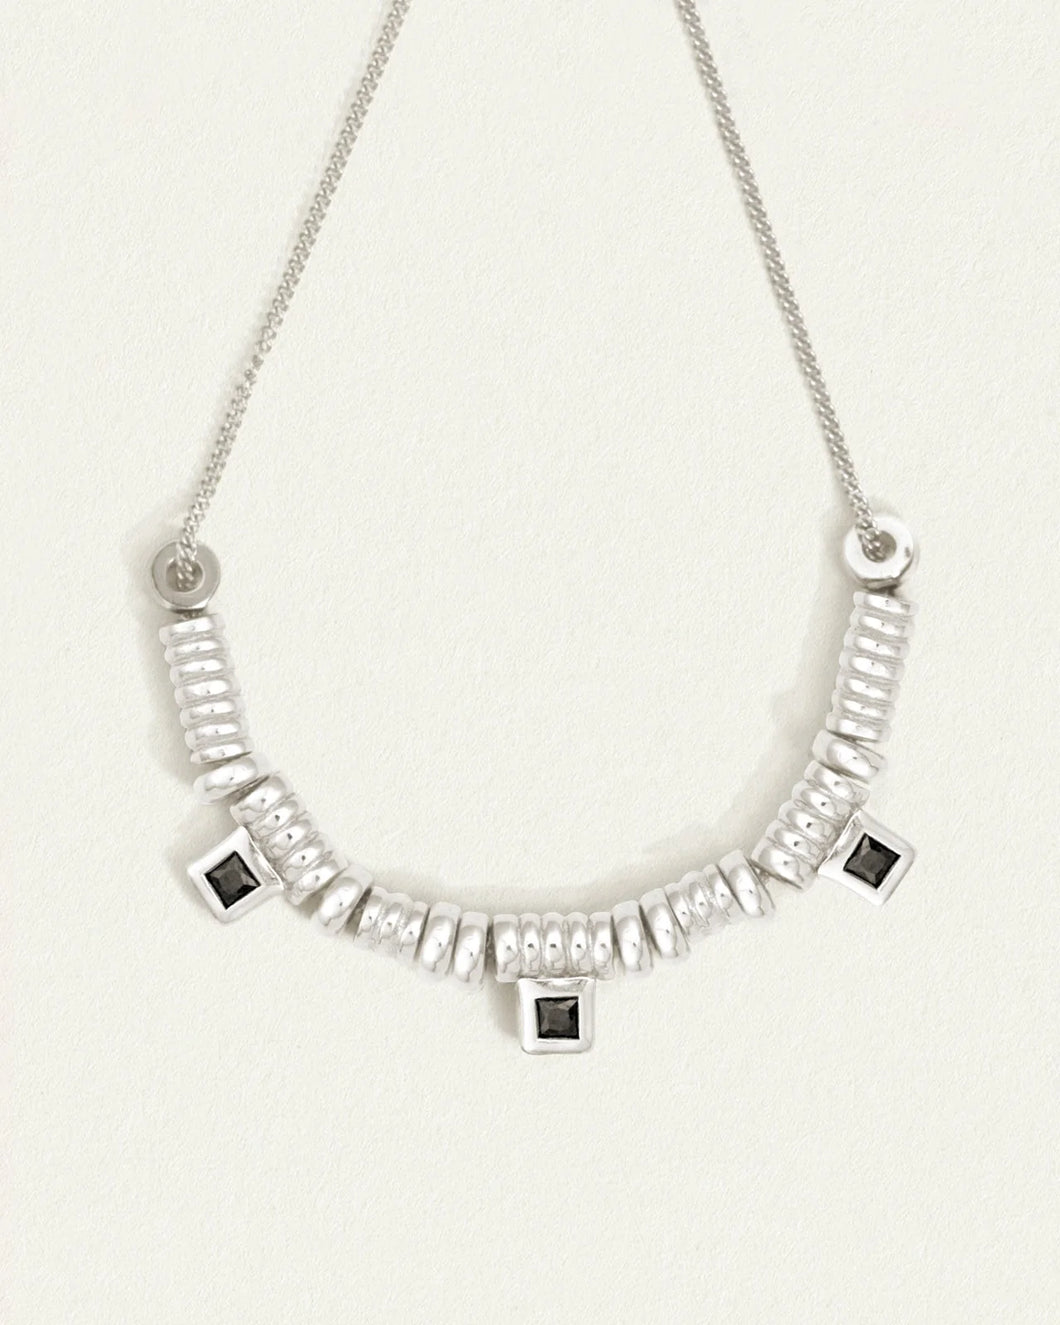 Temple of the Sun - Hebe Necklace Spinel - Silver